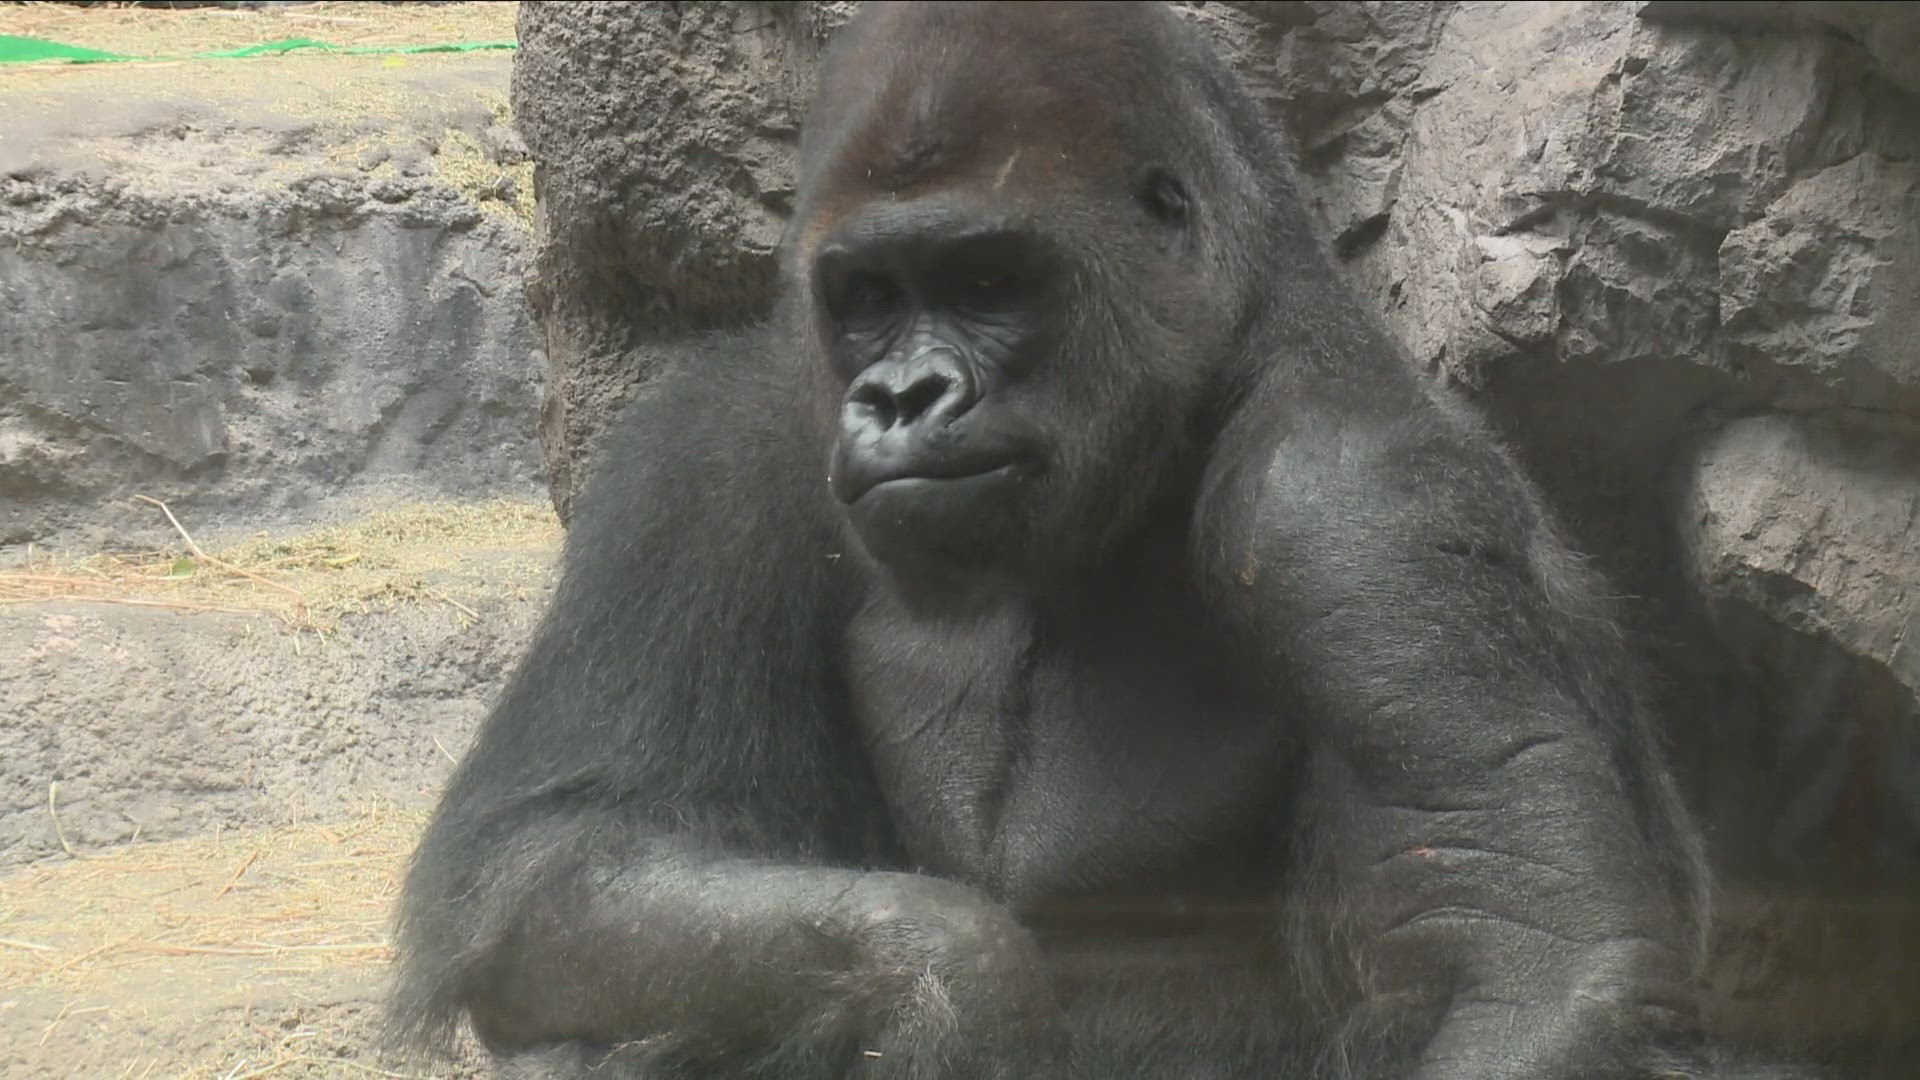 Buffalo Zoo Koga the Gorilla has died at the age of 36